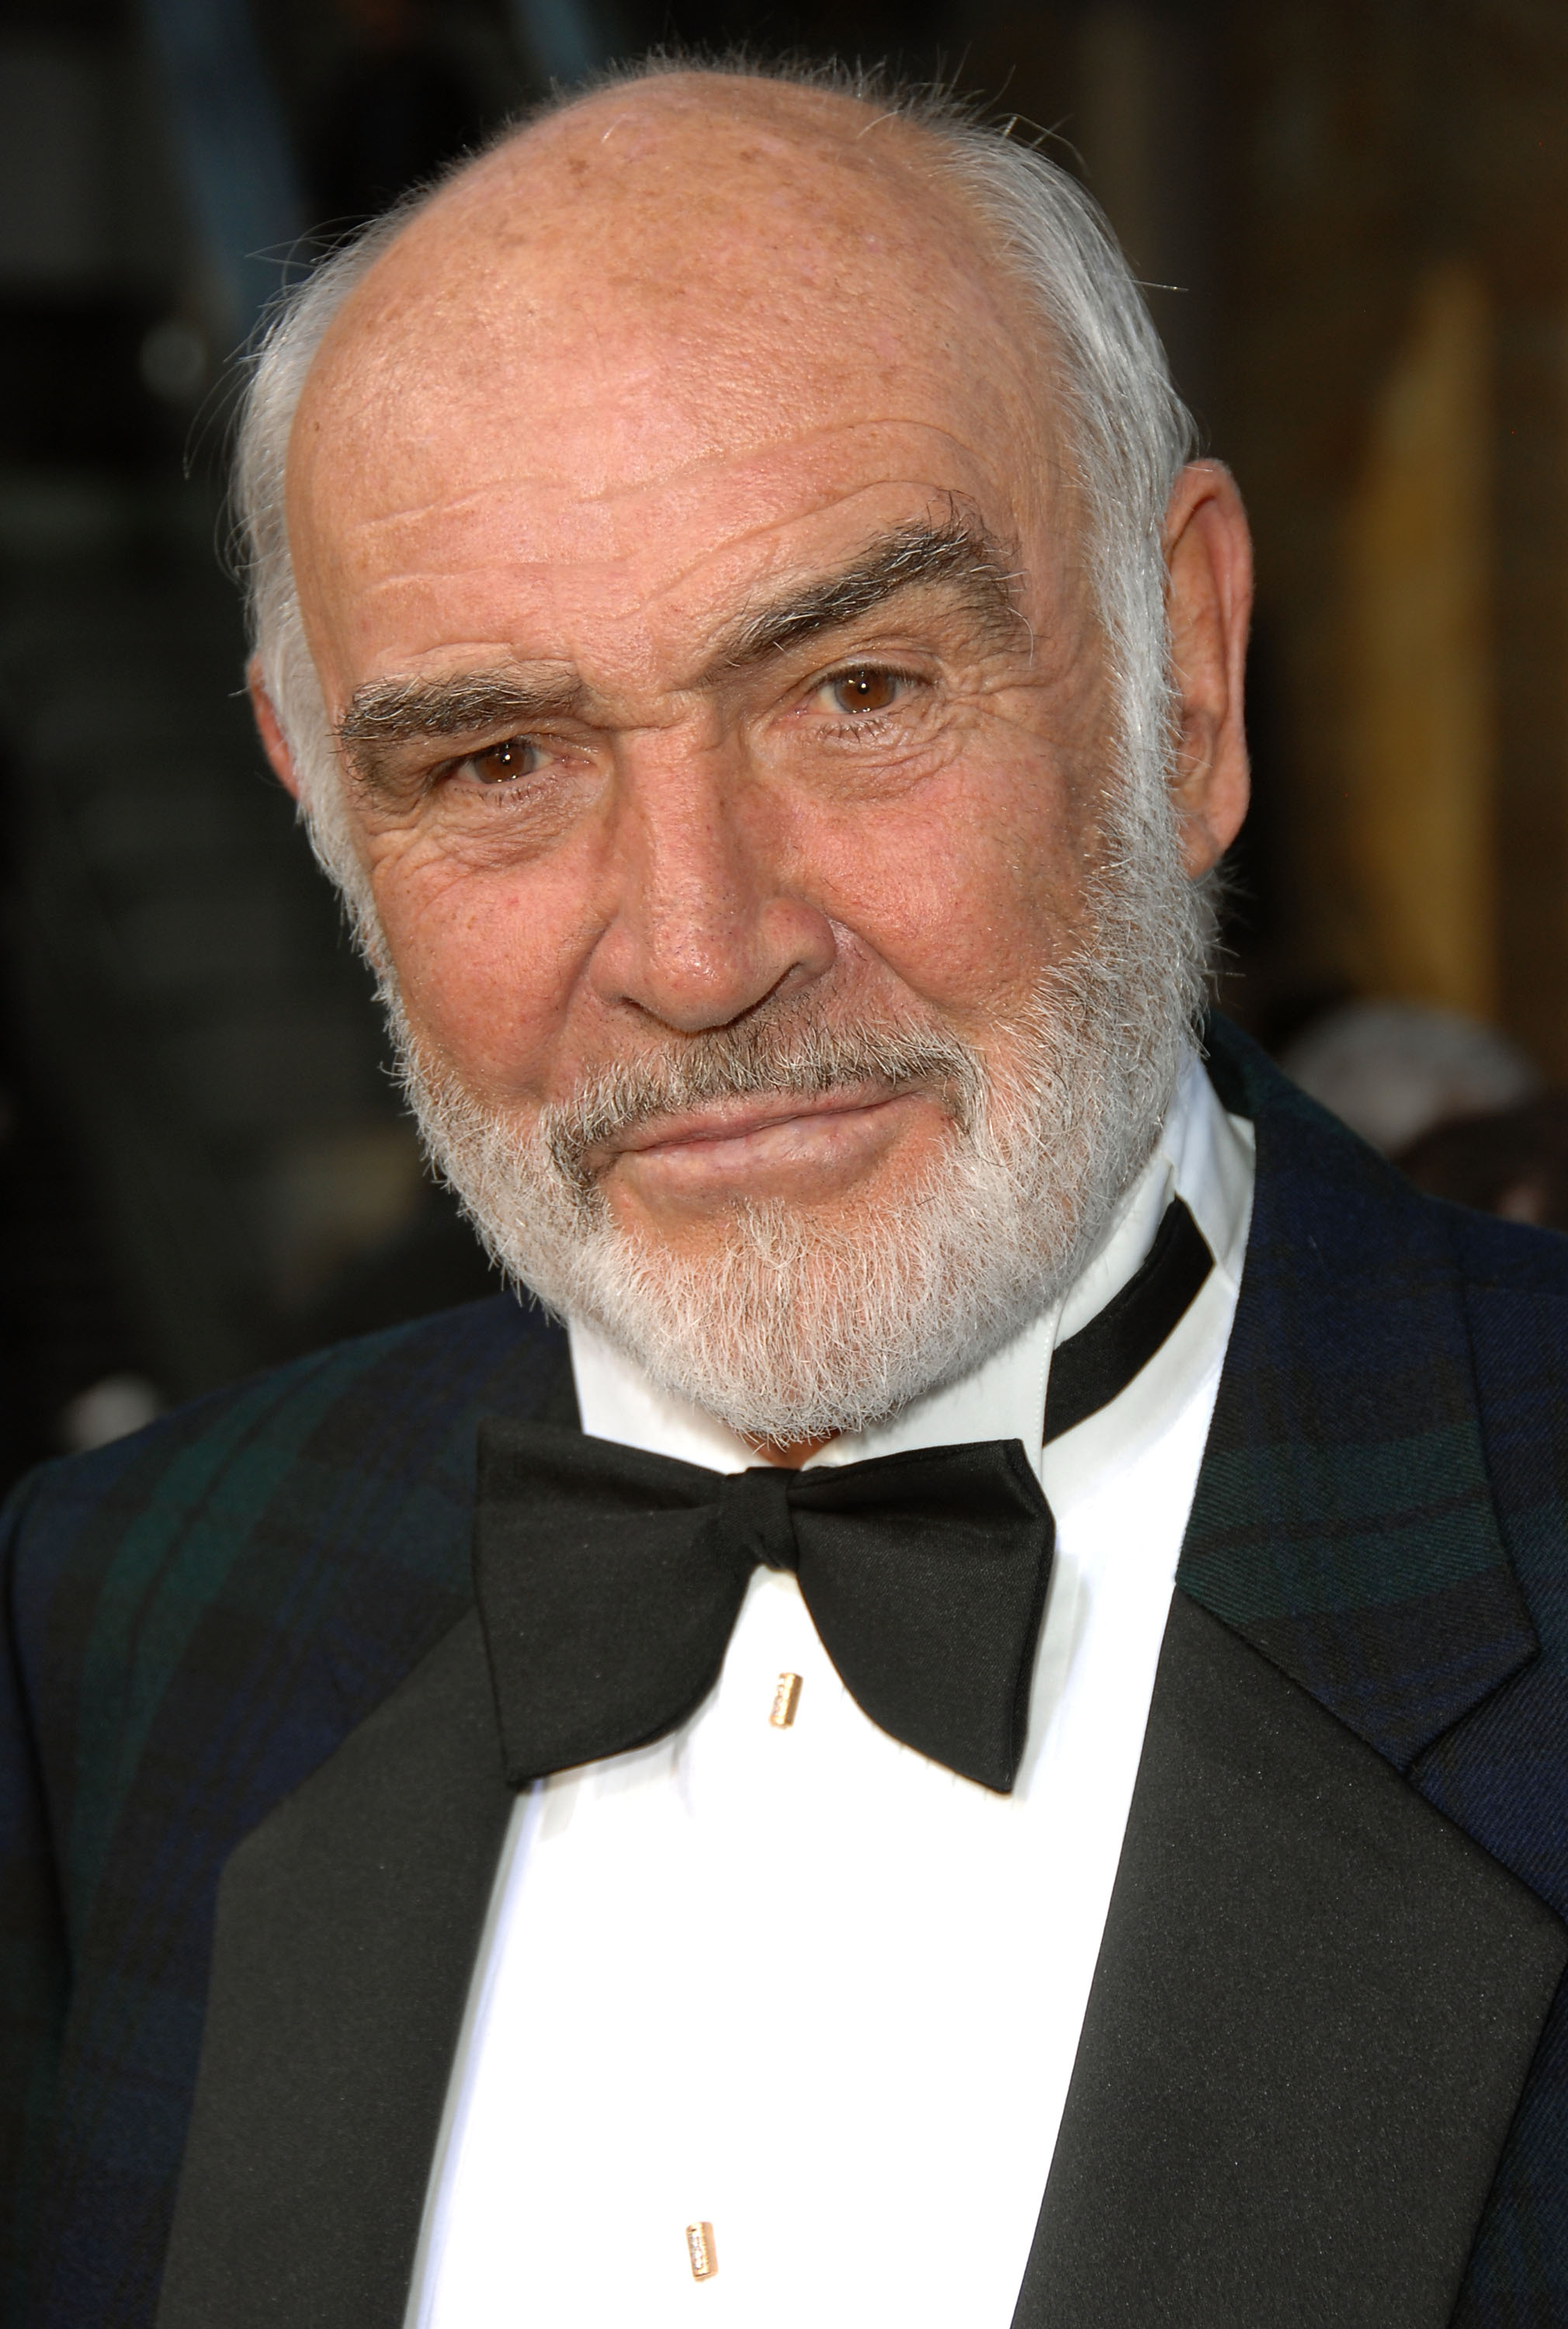 Sean Connery Net Worth | How Rich is Sean Connery? - ALUX.COM